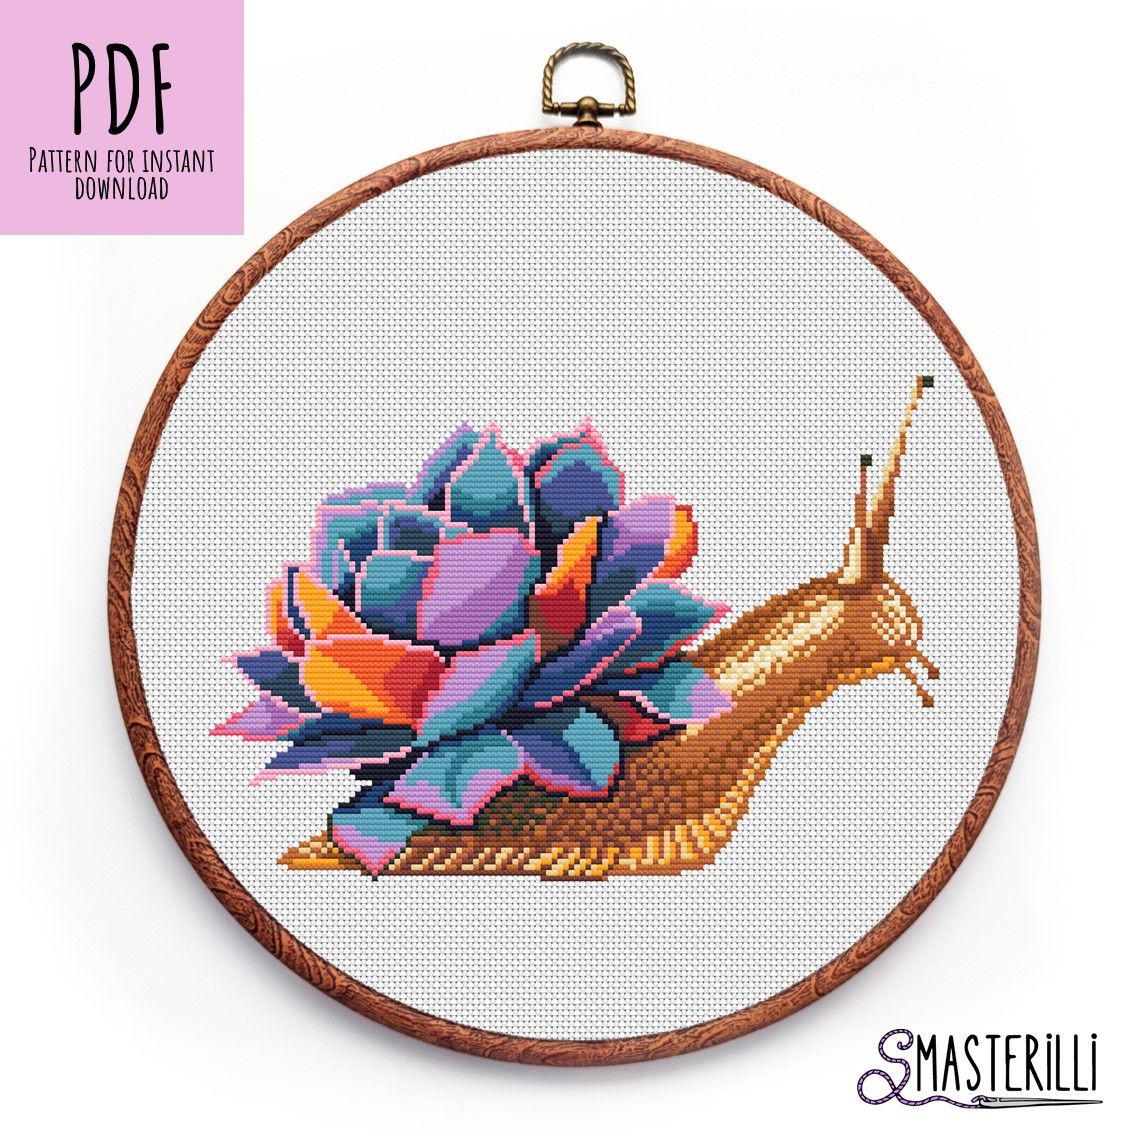 Cross Stitch Pattern of a Snail with a Succulent Plant